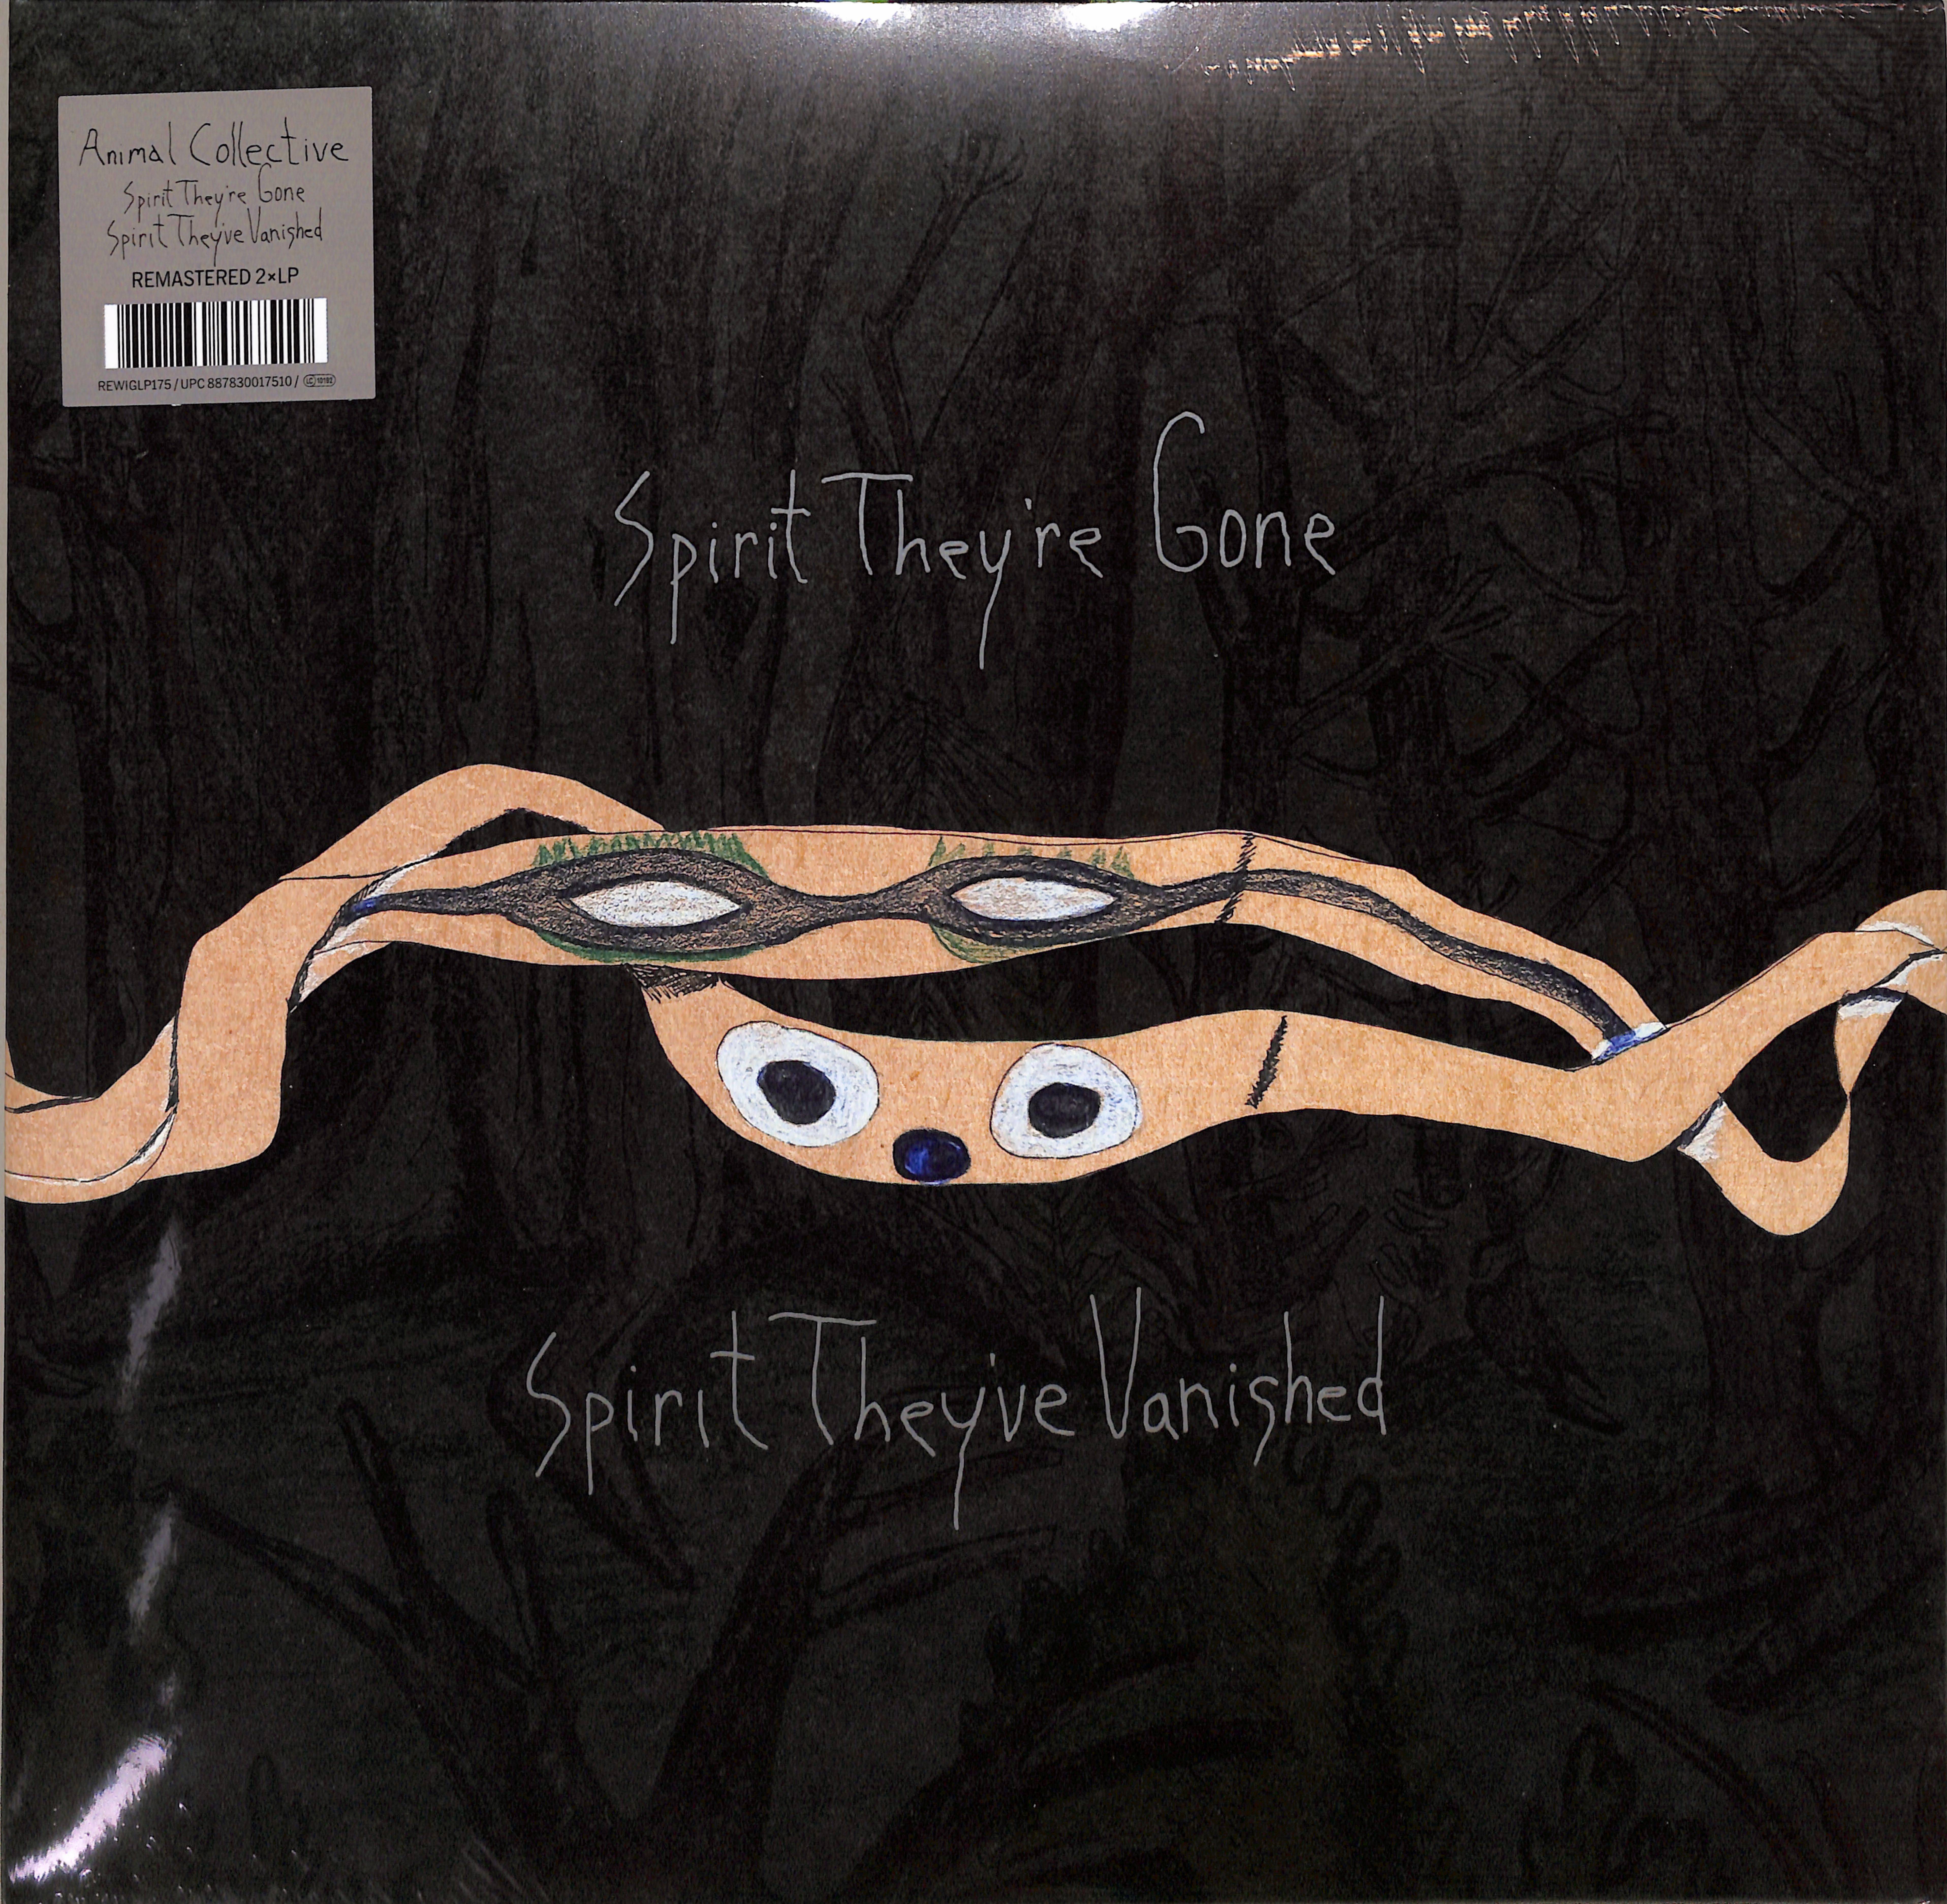 Animal Collective: Spirit They're Gone, Spirit They've Vanished